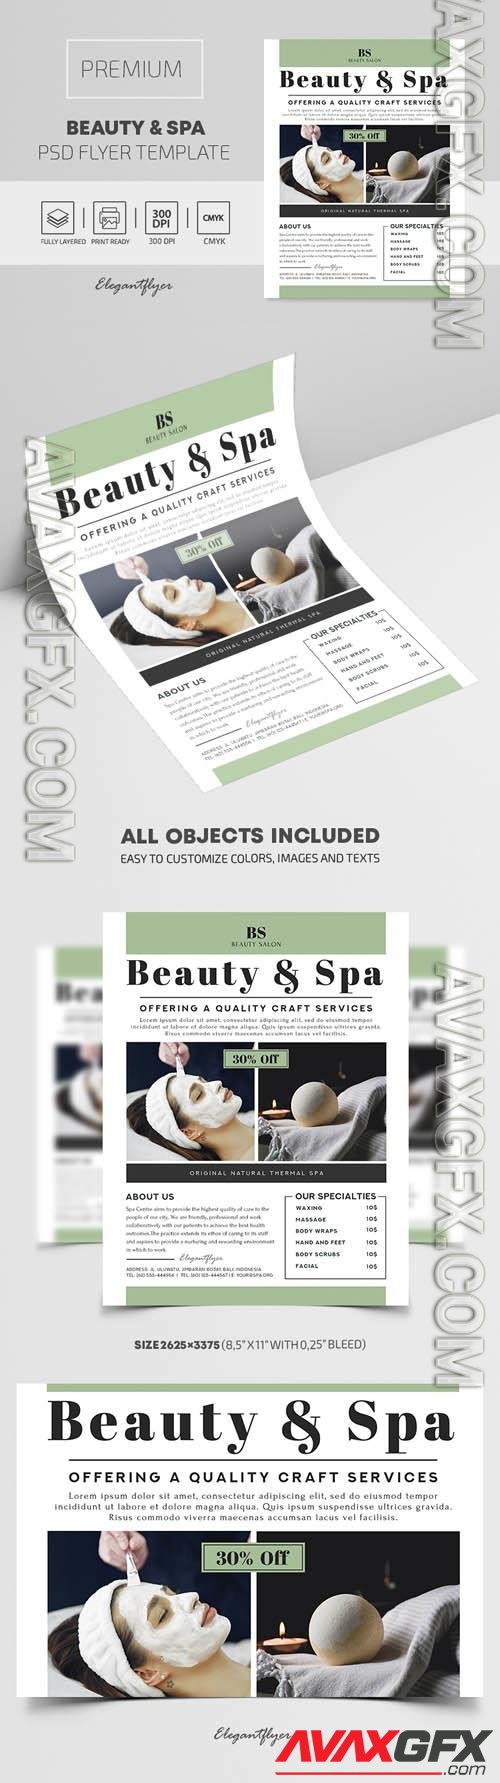 Beauty and Spa Premium PSD Flyer Template